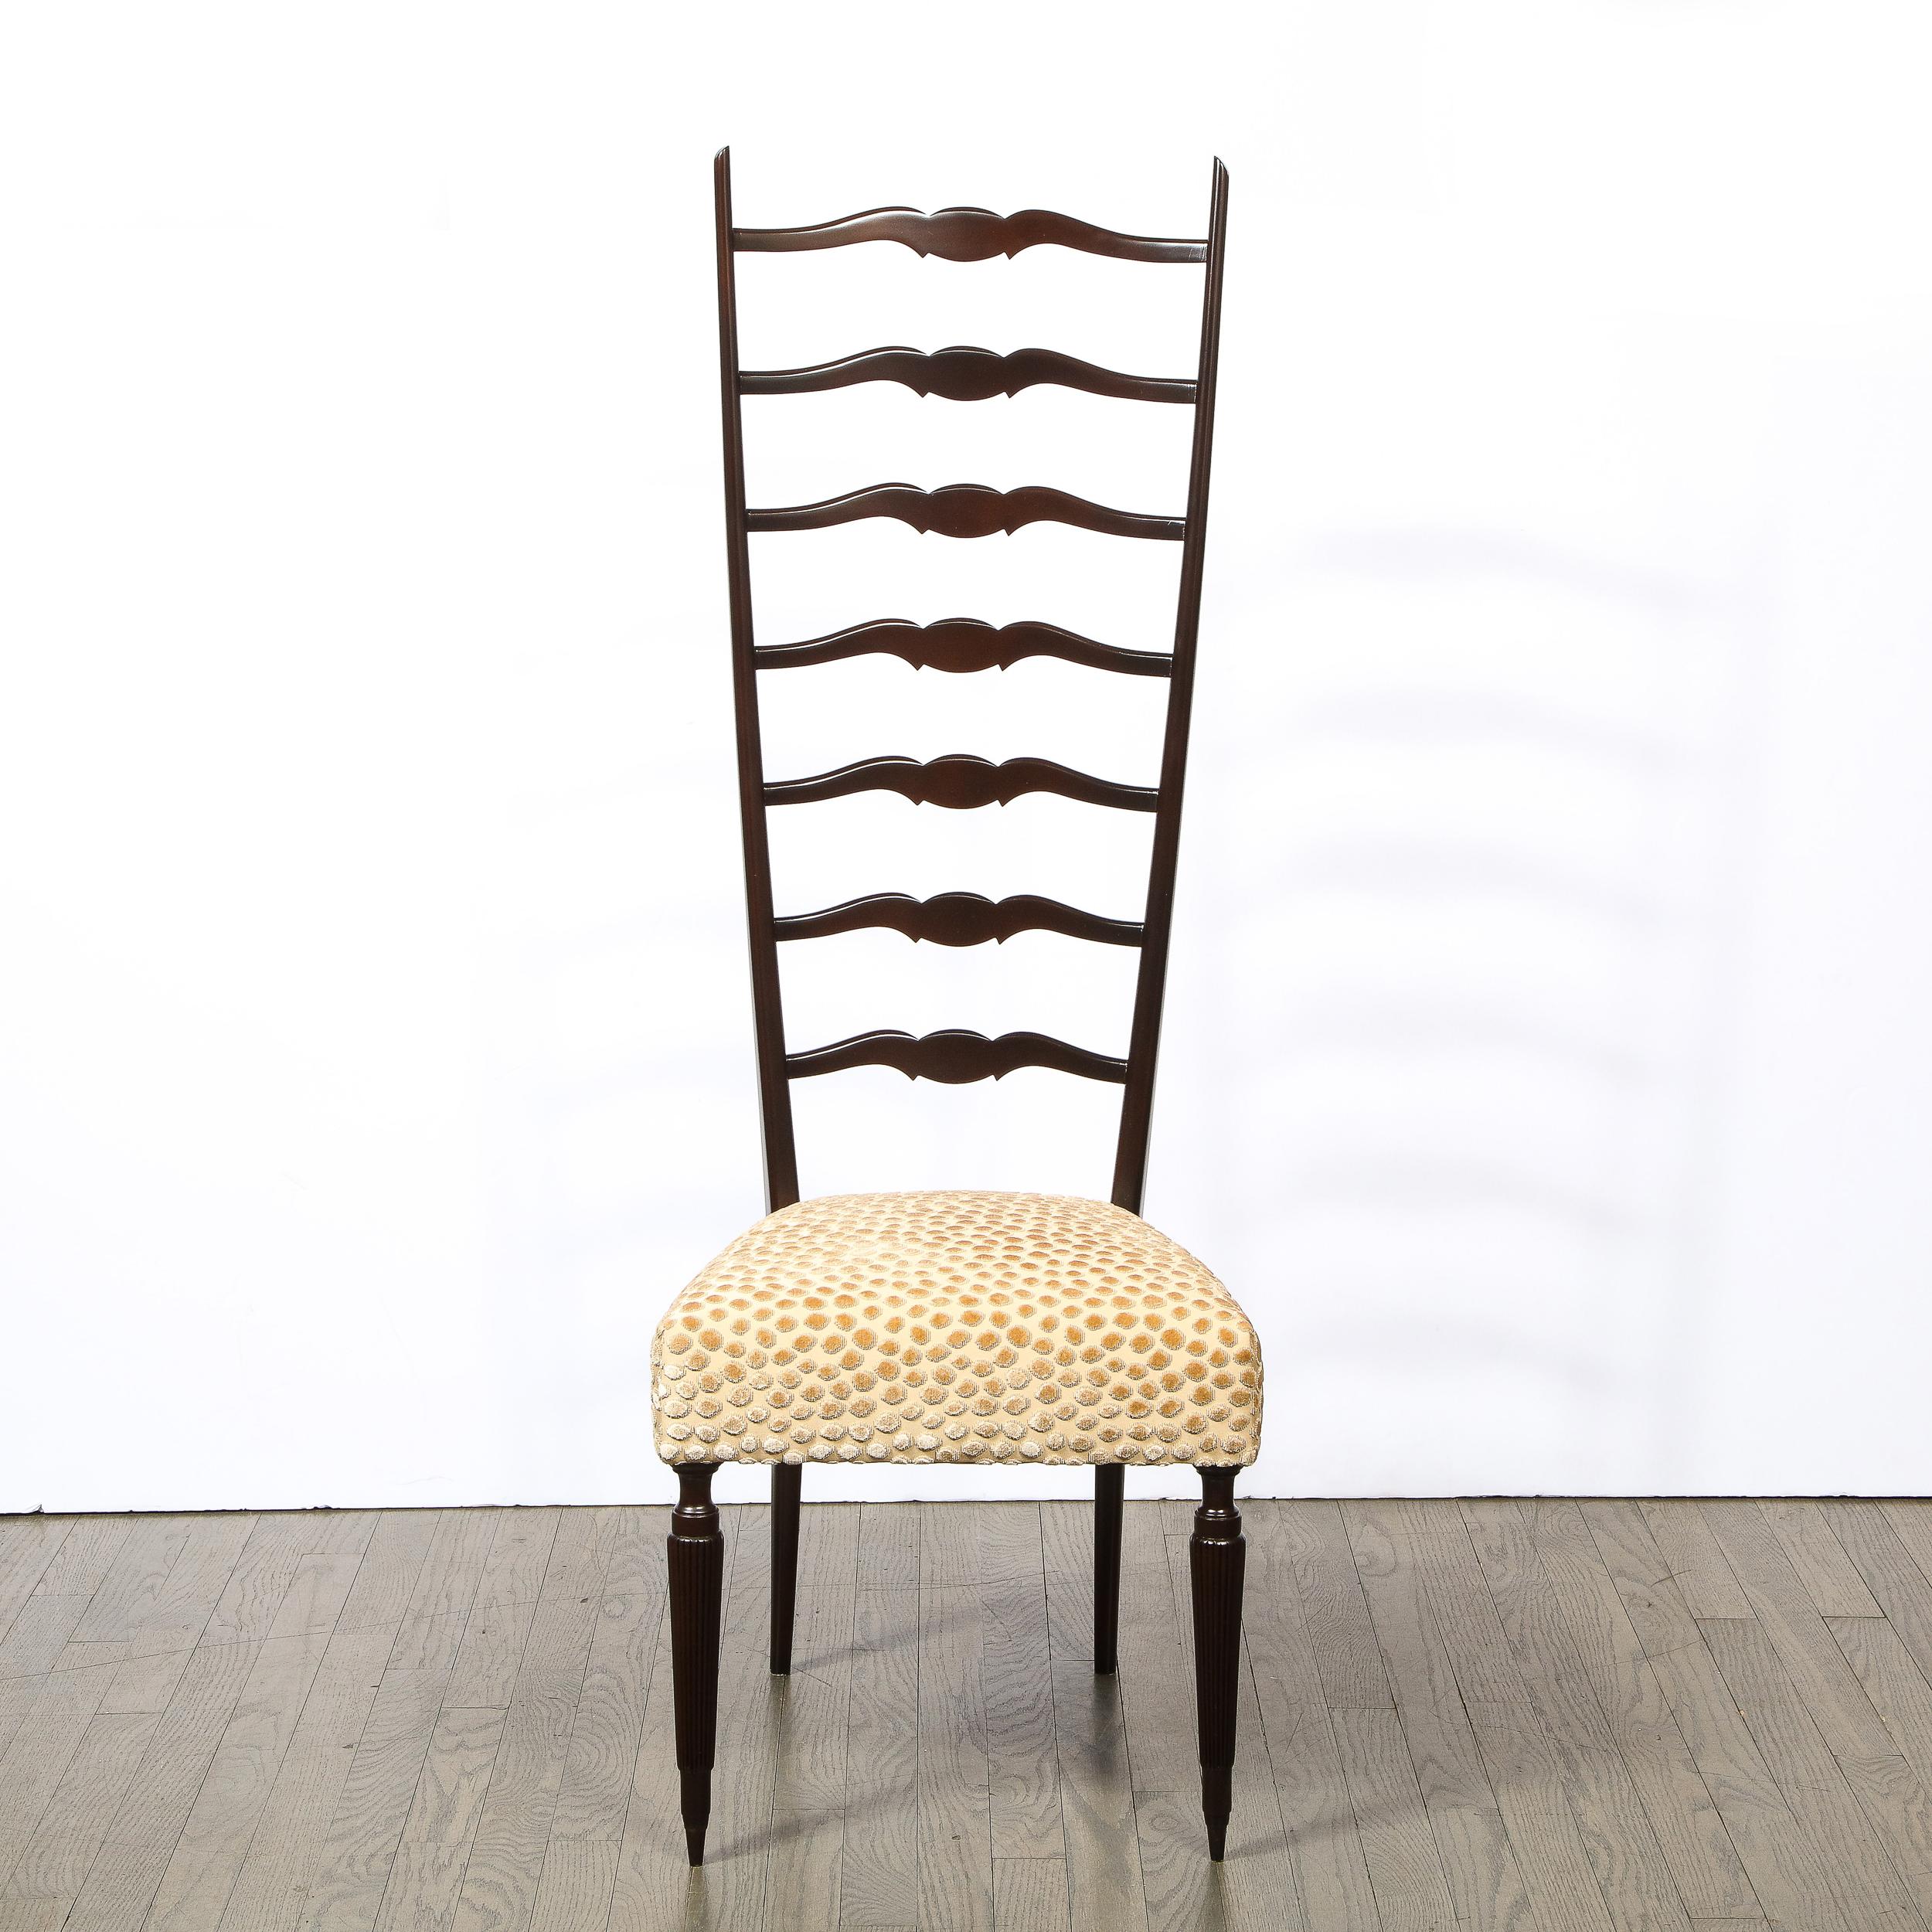 This graphic and sophisticated pair of Mid-Century Modern ladder back chairs were realized in Italy, circa 1950. These are a rare version of the Italian ladder back chair- popularized by iconic designers such as Gio Ponti- exhibiting an exquisite